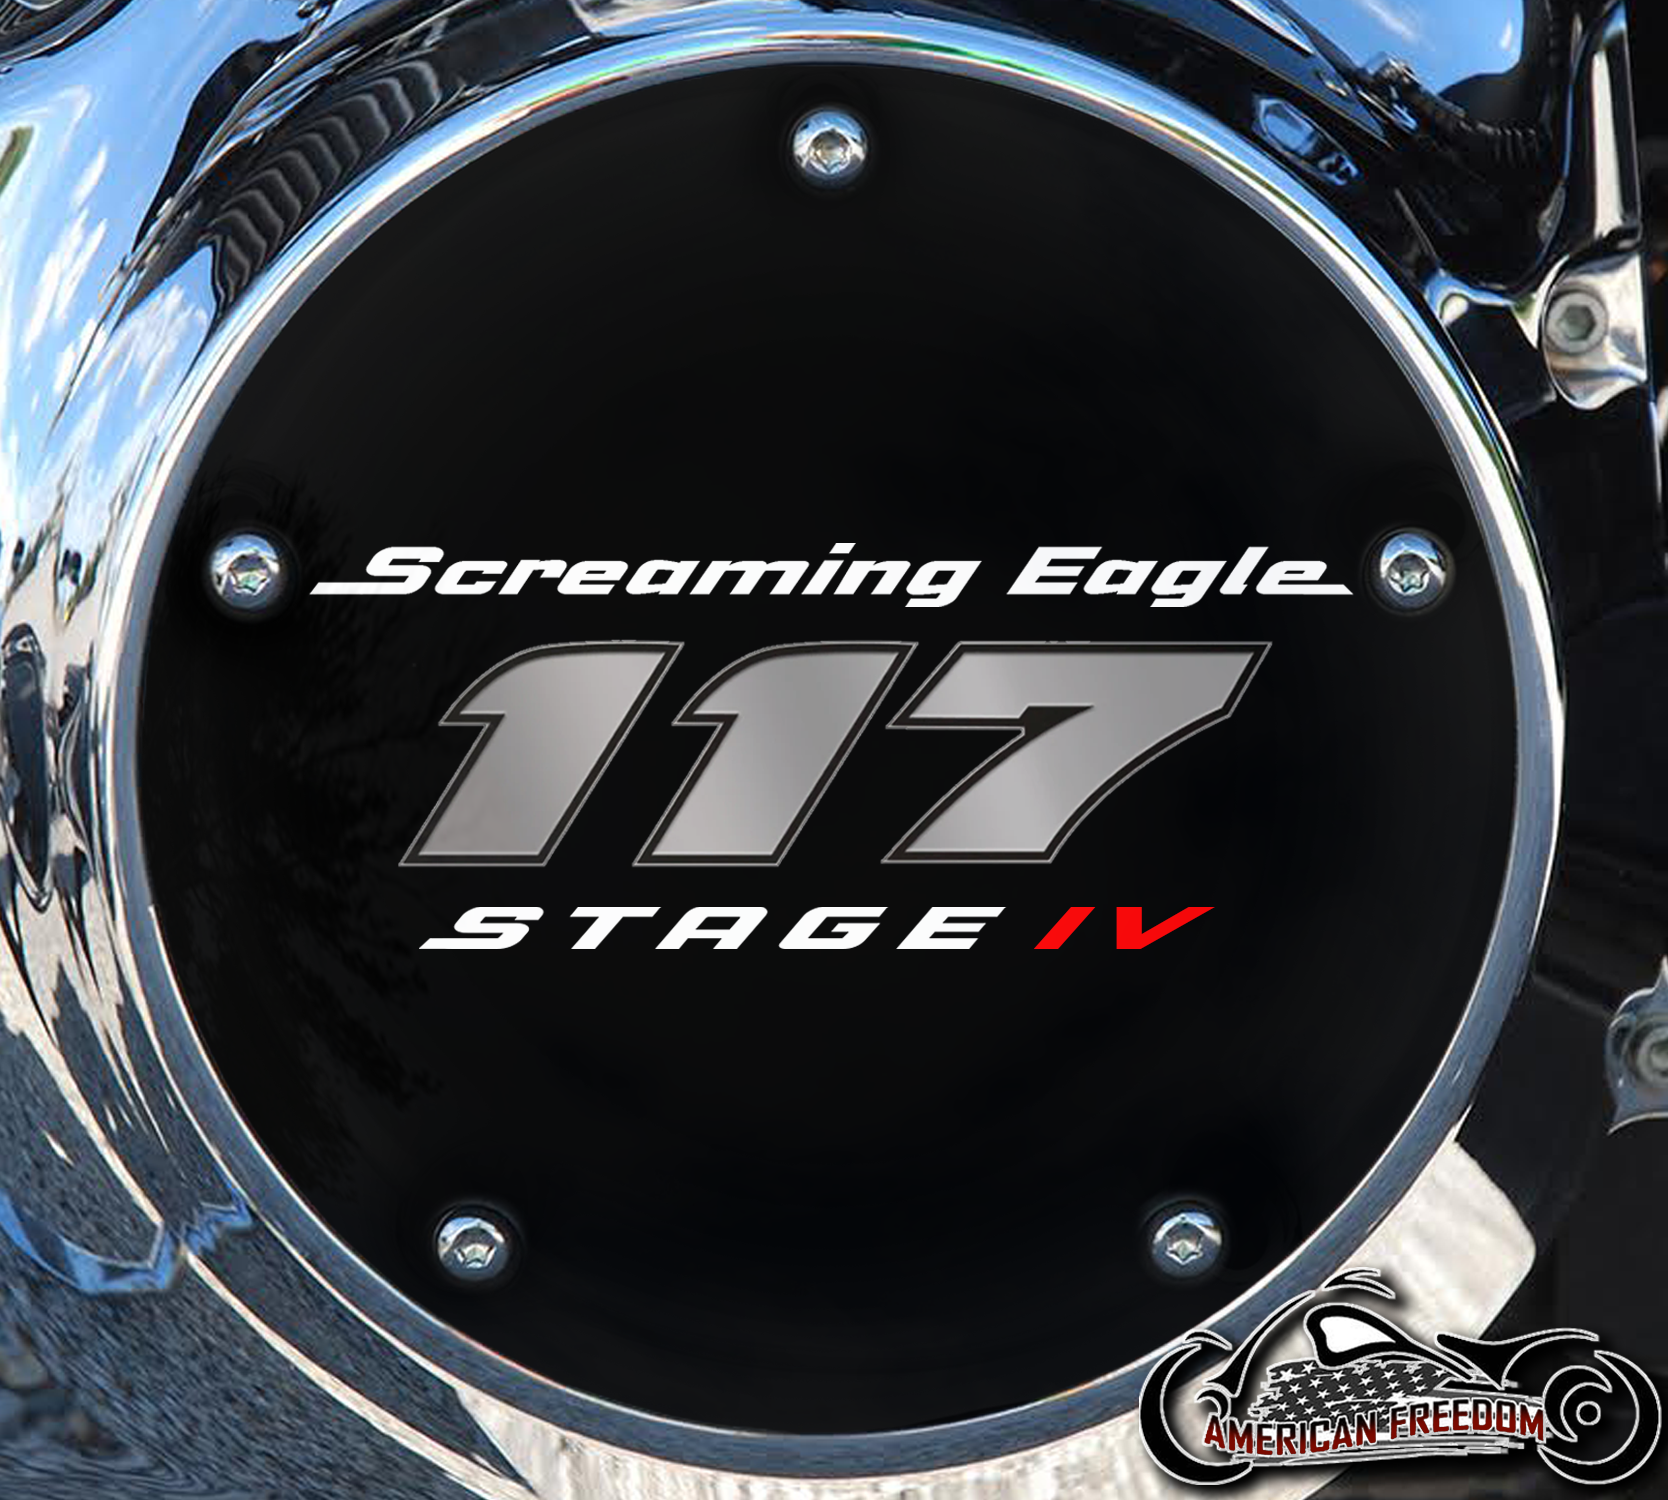 Screaming Eagle Stage IV 117 Derby Cover